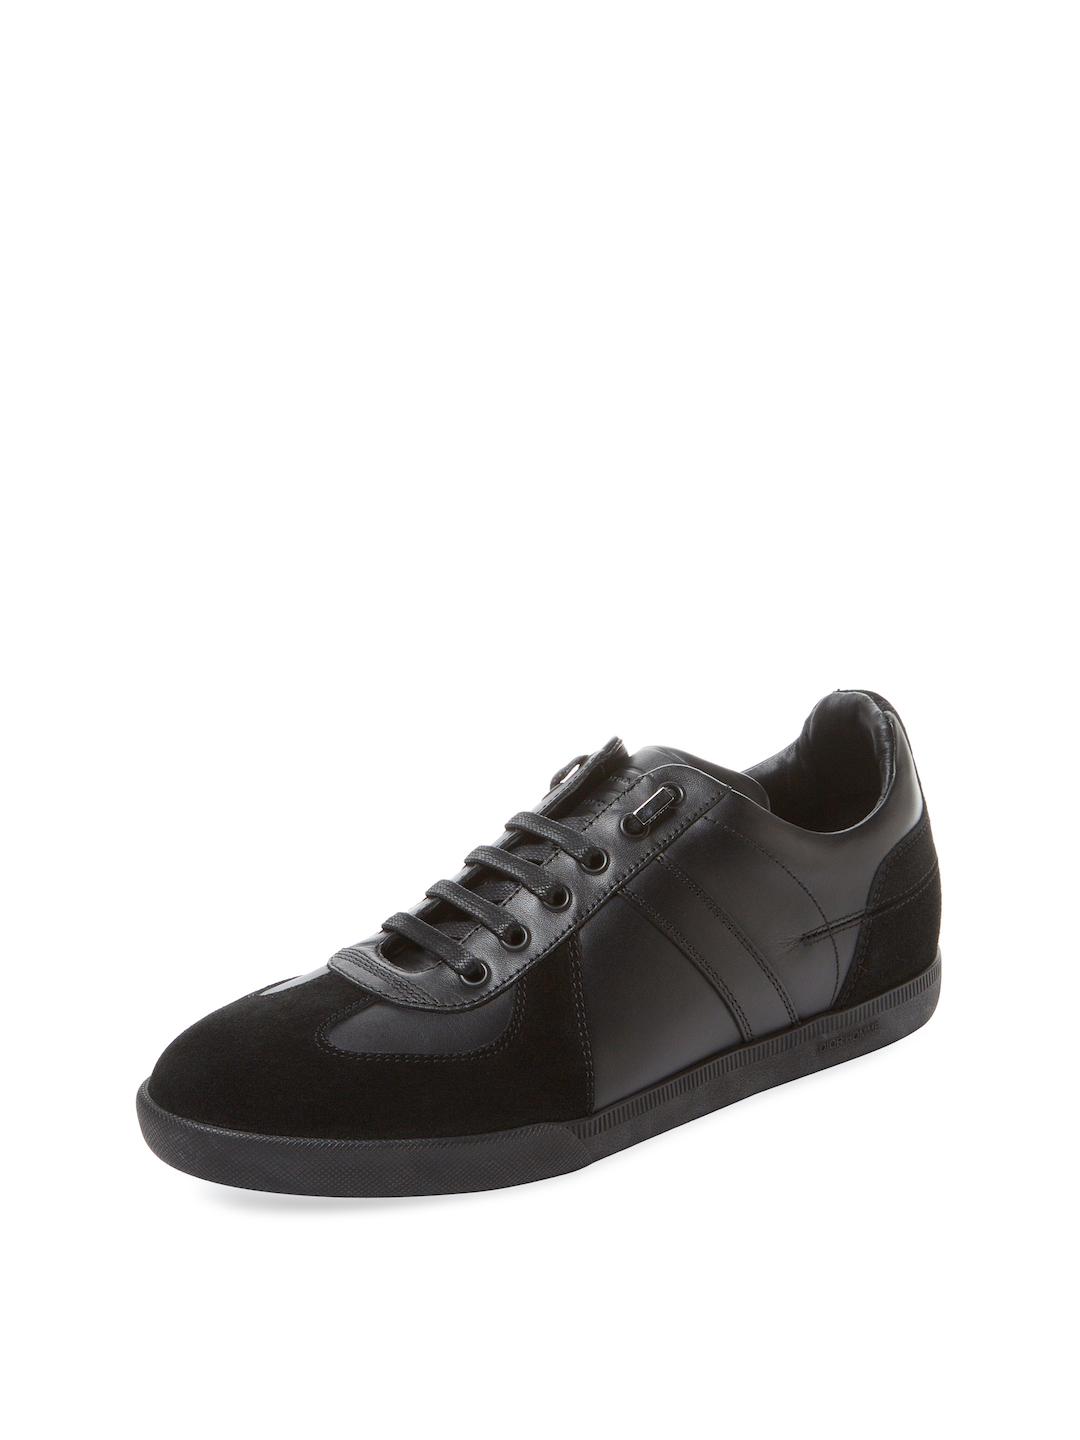 Dior Homme Leather Cd Low Top Sneaker in Black for Men | Lyst